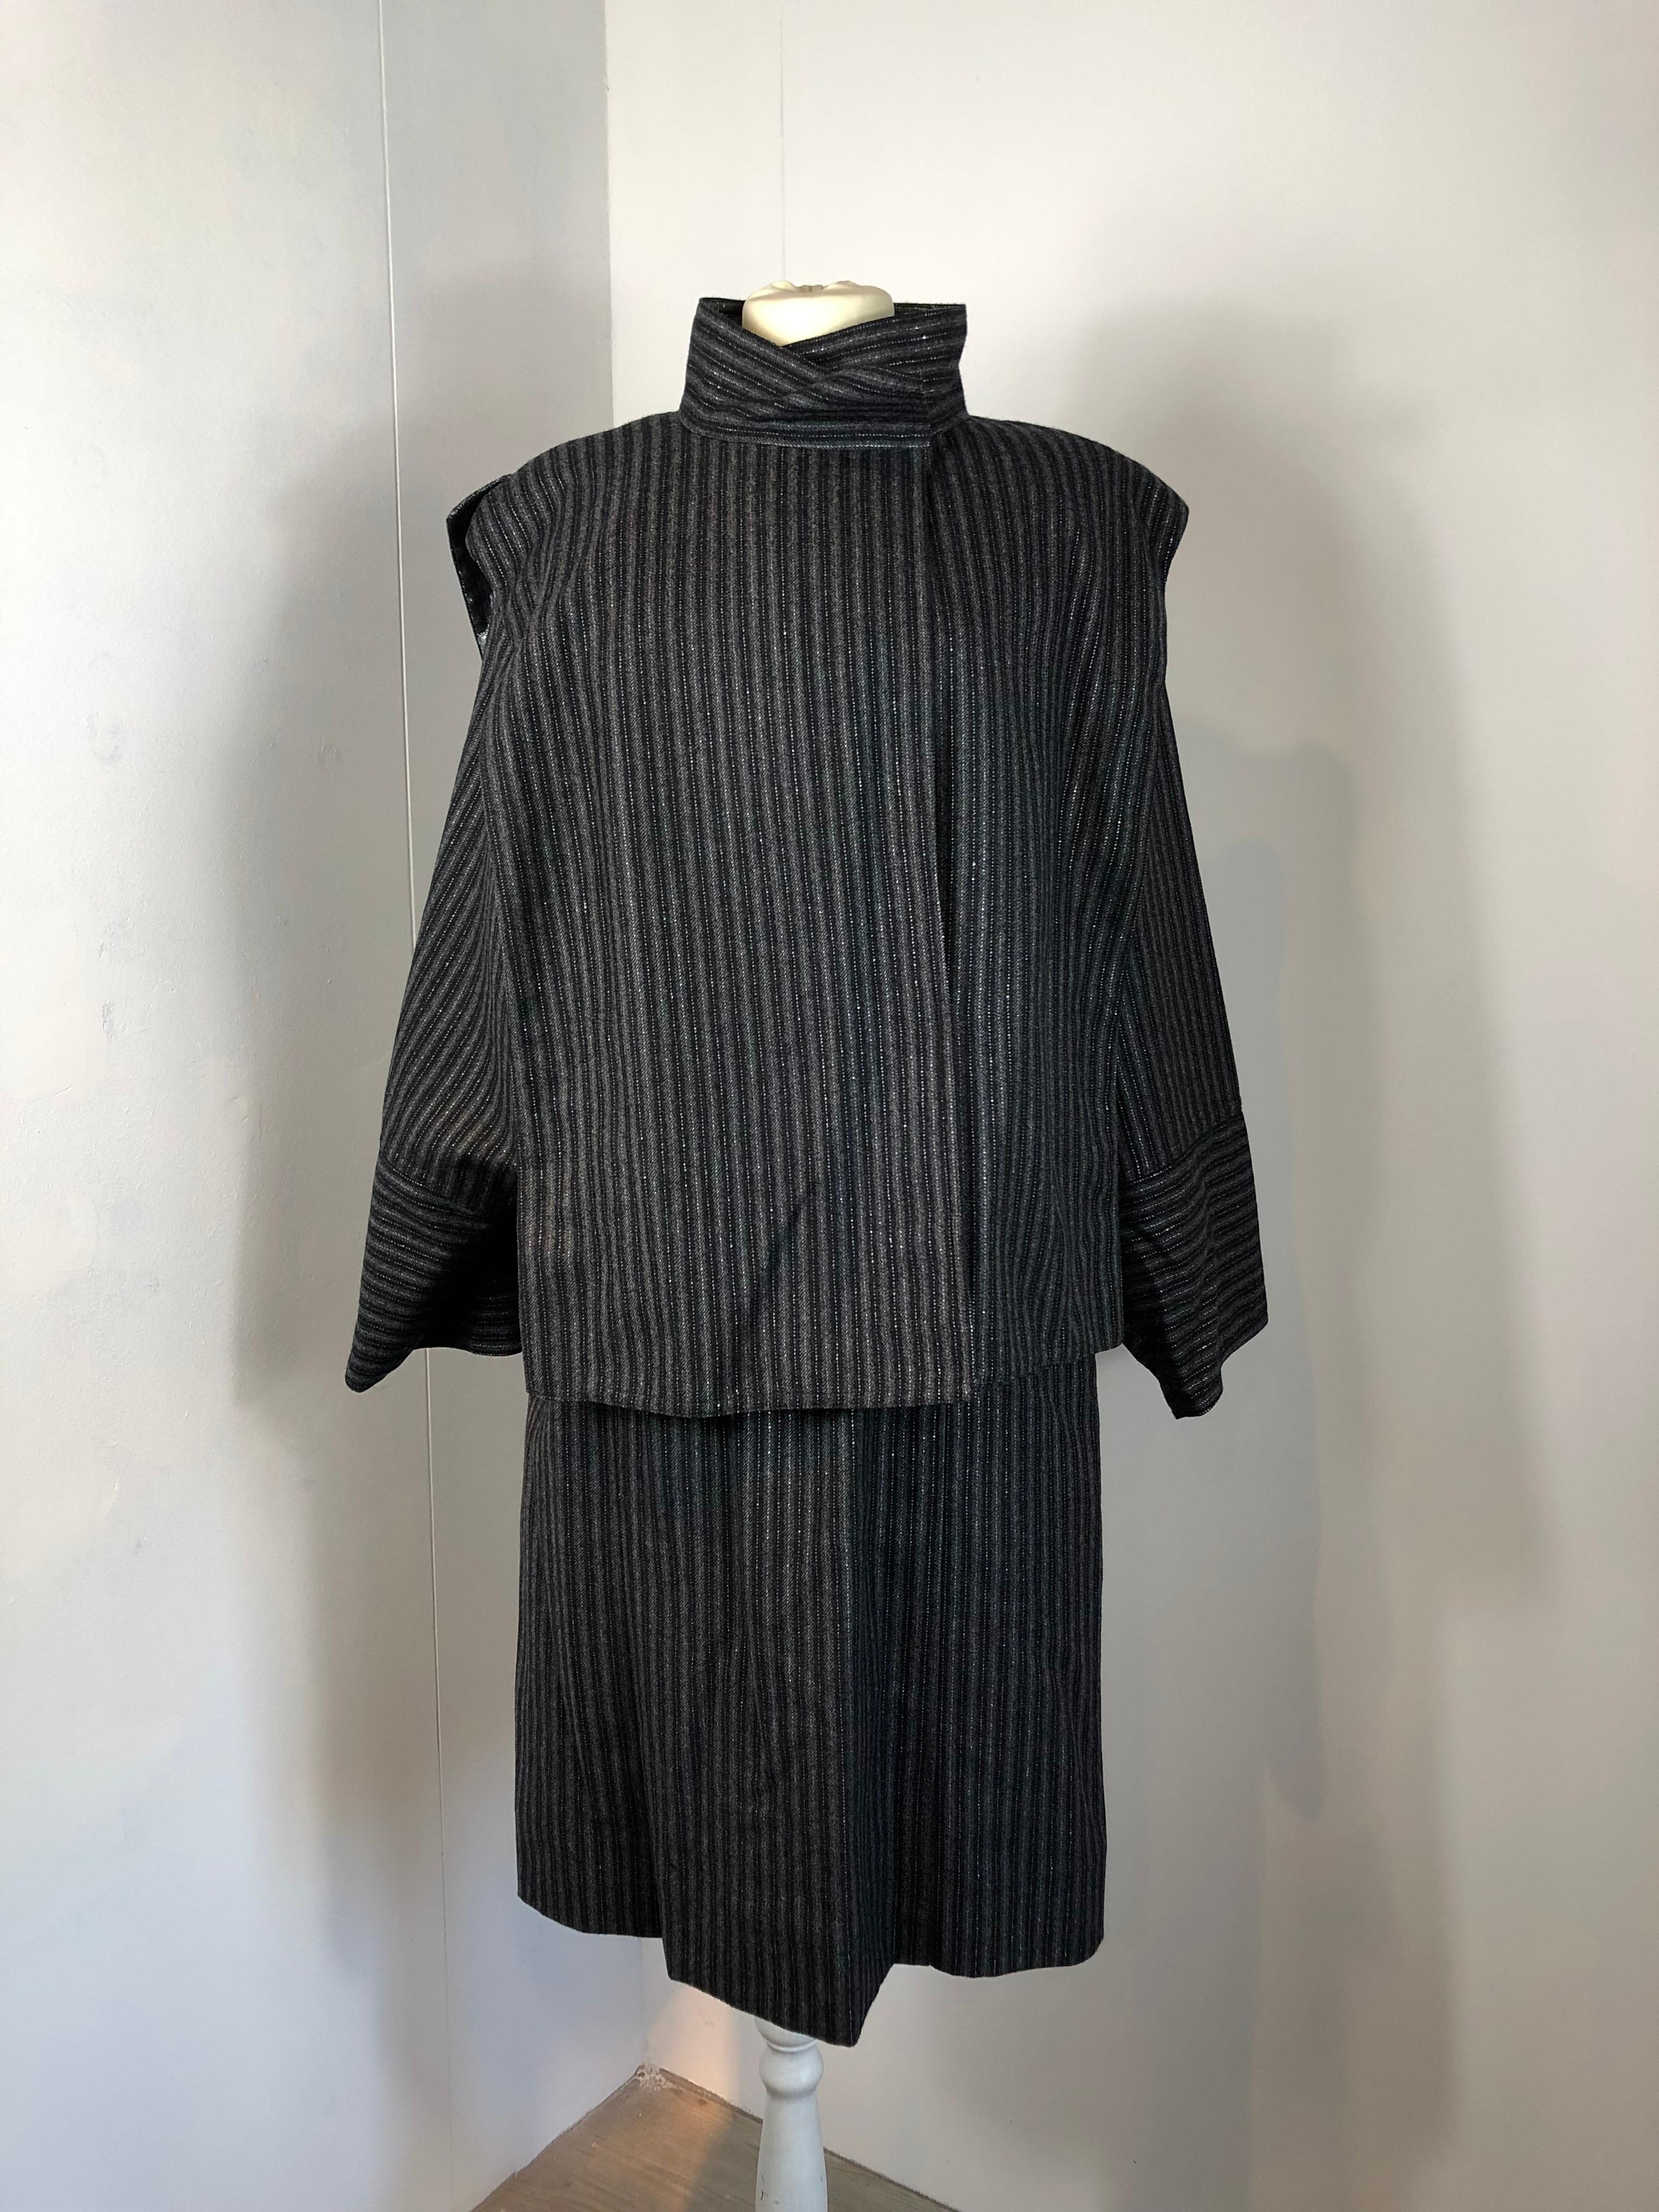 Chloè Suit. Jackets & skirt. 
Designed by Karl Lagerfeld. About 80s. 
The composition and the size label are missing.
It feels like a mix between wool and lurex. 
It fits a 44 Italian. 
Measurements: Jacket
Shoulders 44 cm
Bust 46 cm 
Sleeves 60